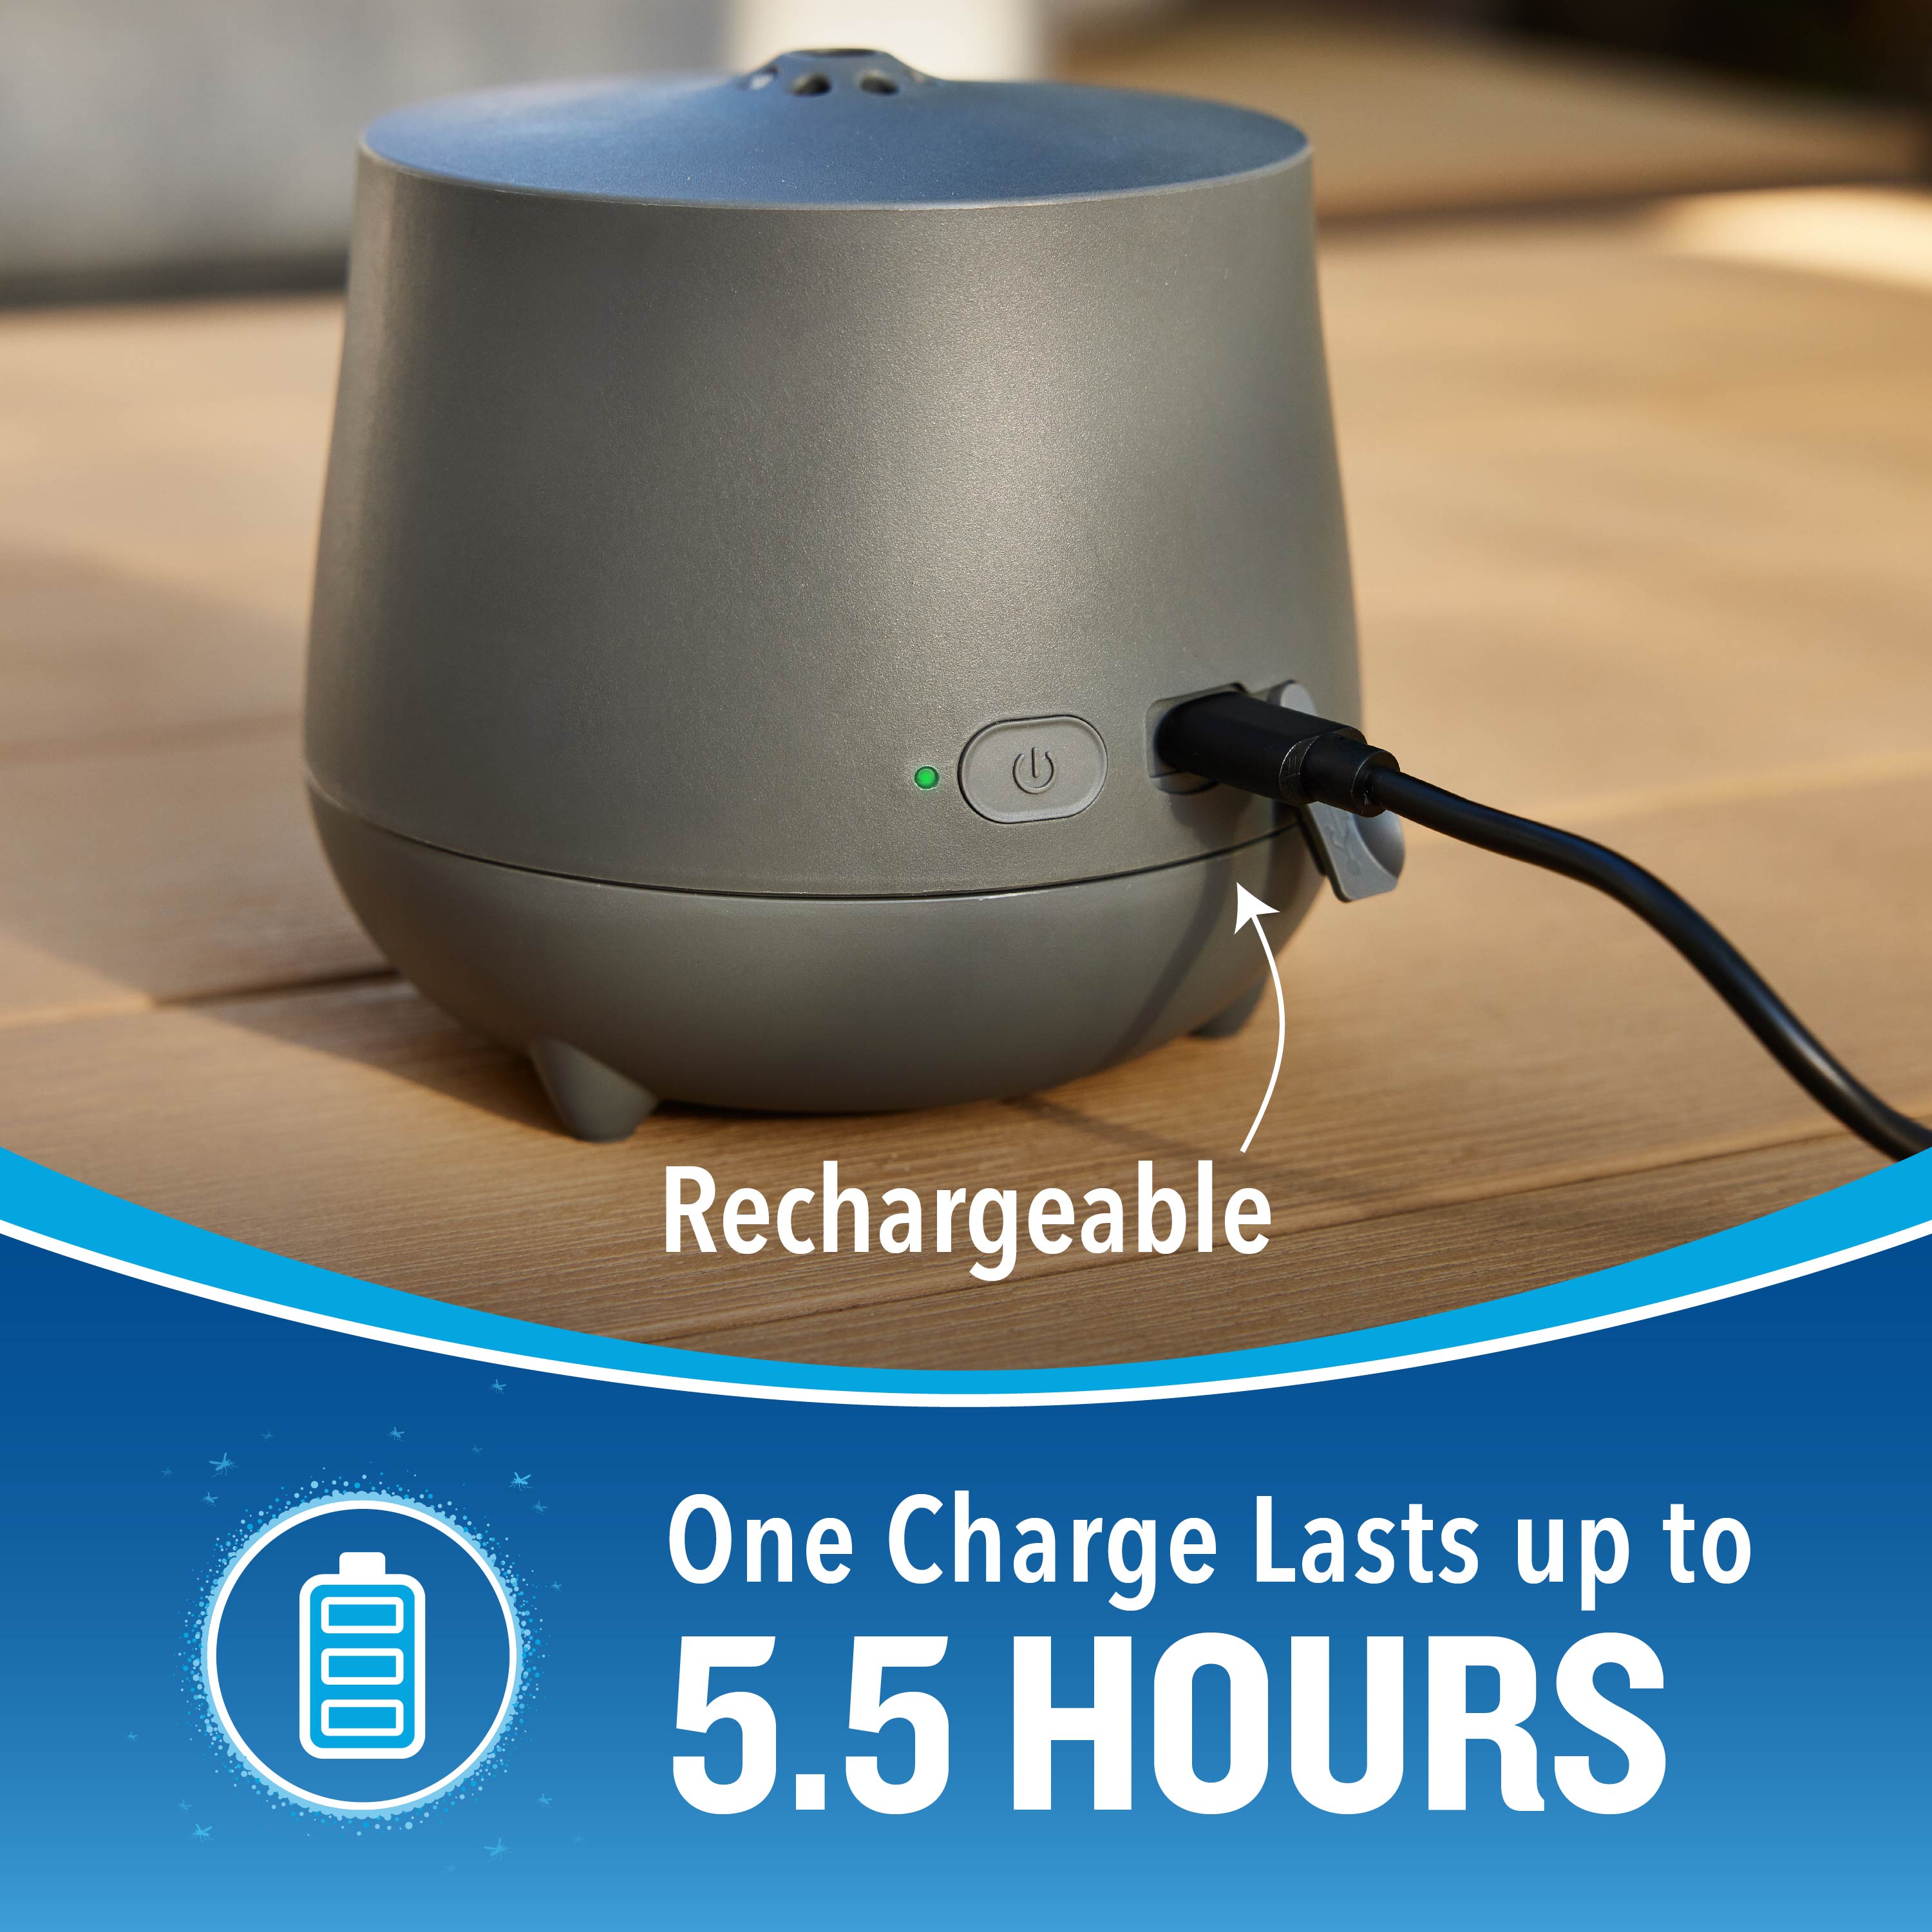 Eclipse™ Zone Mosquito Repellent Outdoor Device - One Charge Lasts up to 5.5 Hours